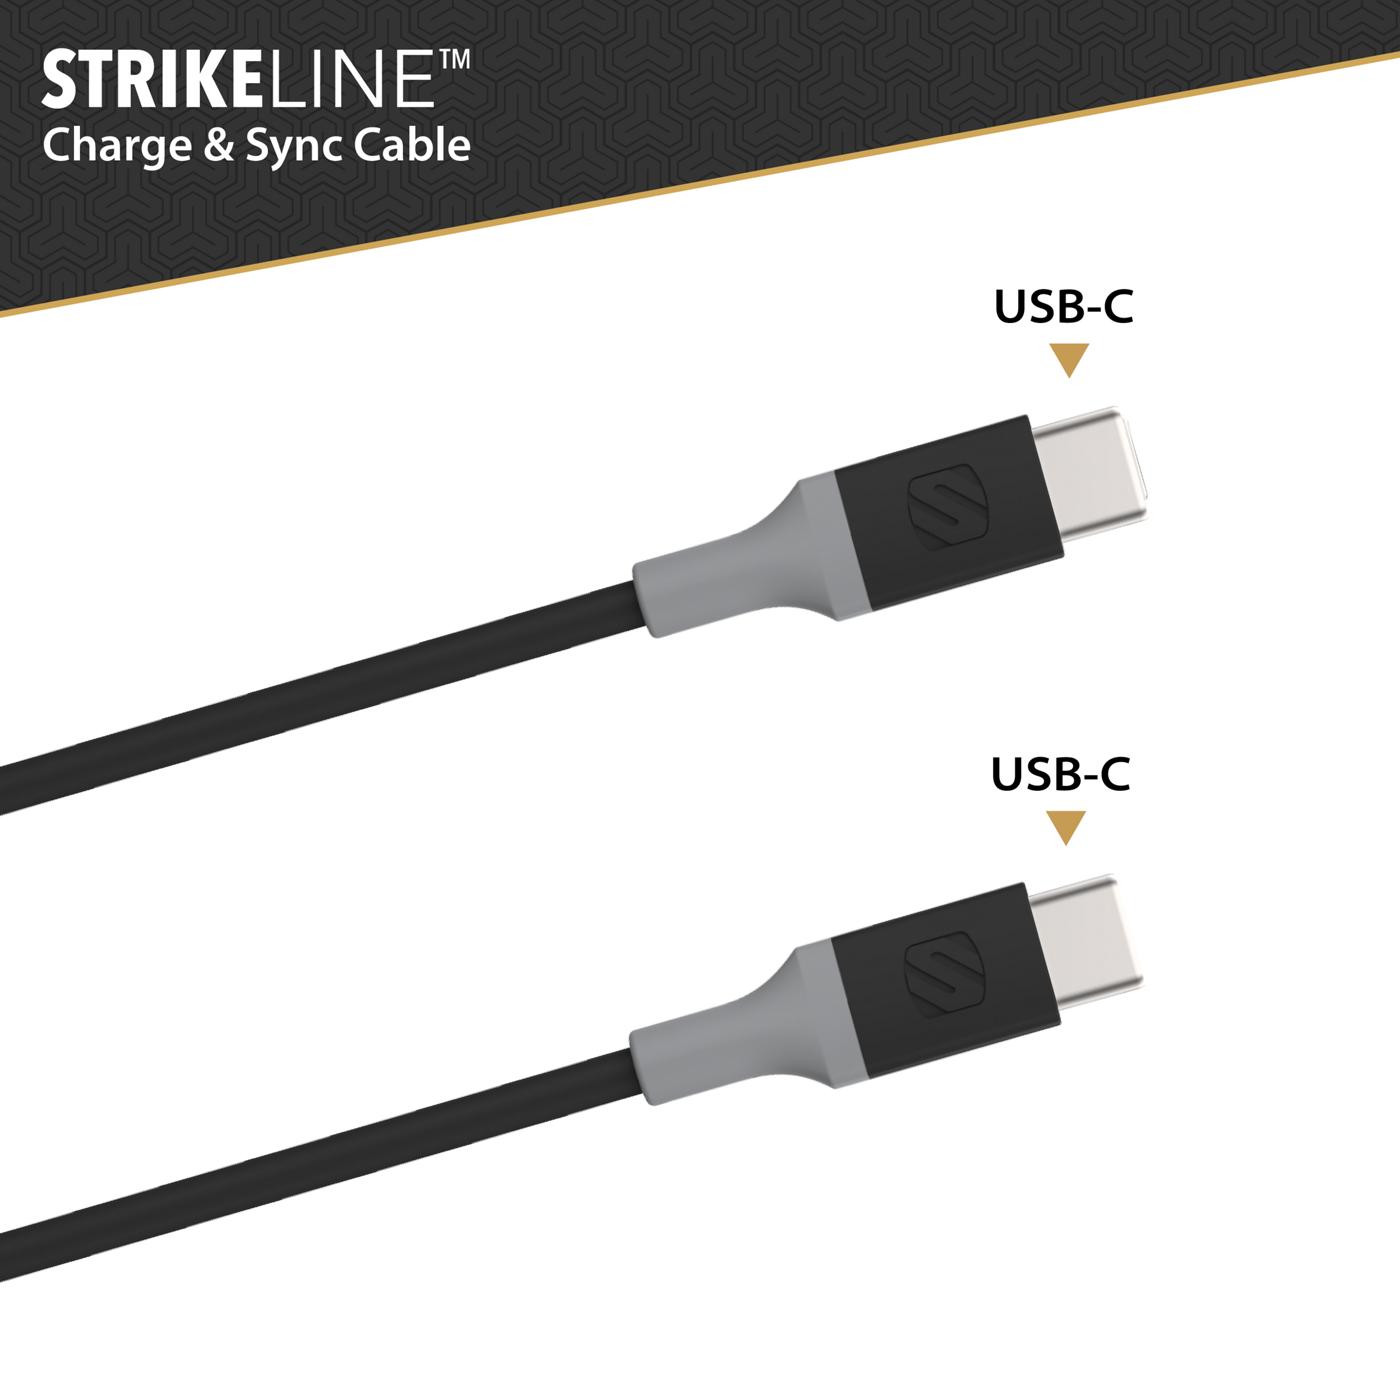 Scosche StrikeLine USB-C to USB-C Charge & Sync Cable; image 4 of 5